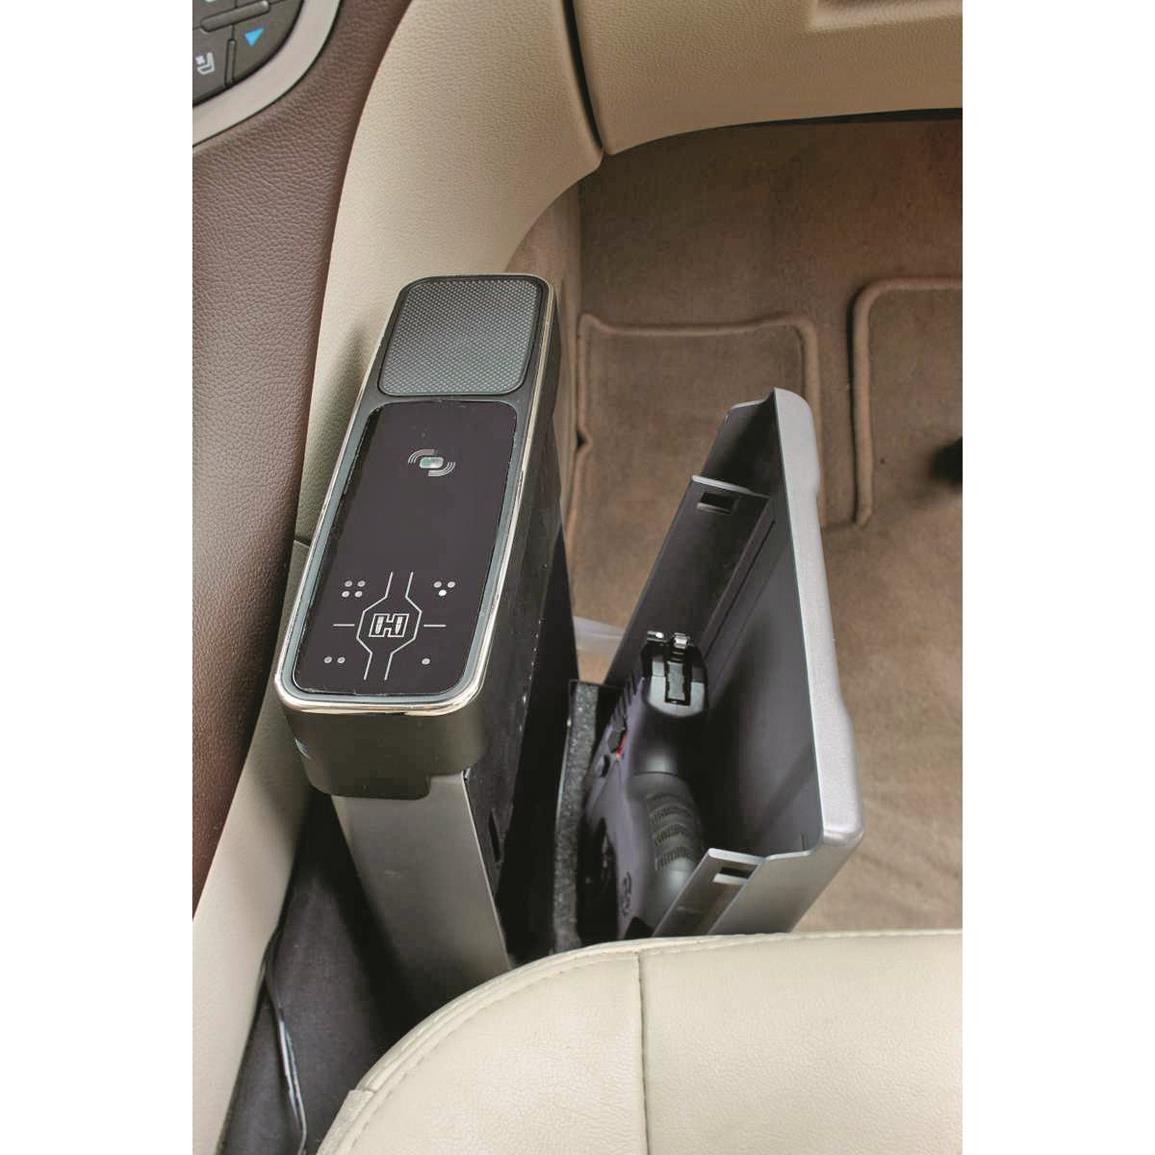 Can be mounted on both the driver and passenger side of your vehicle